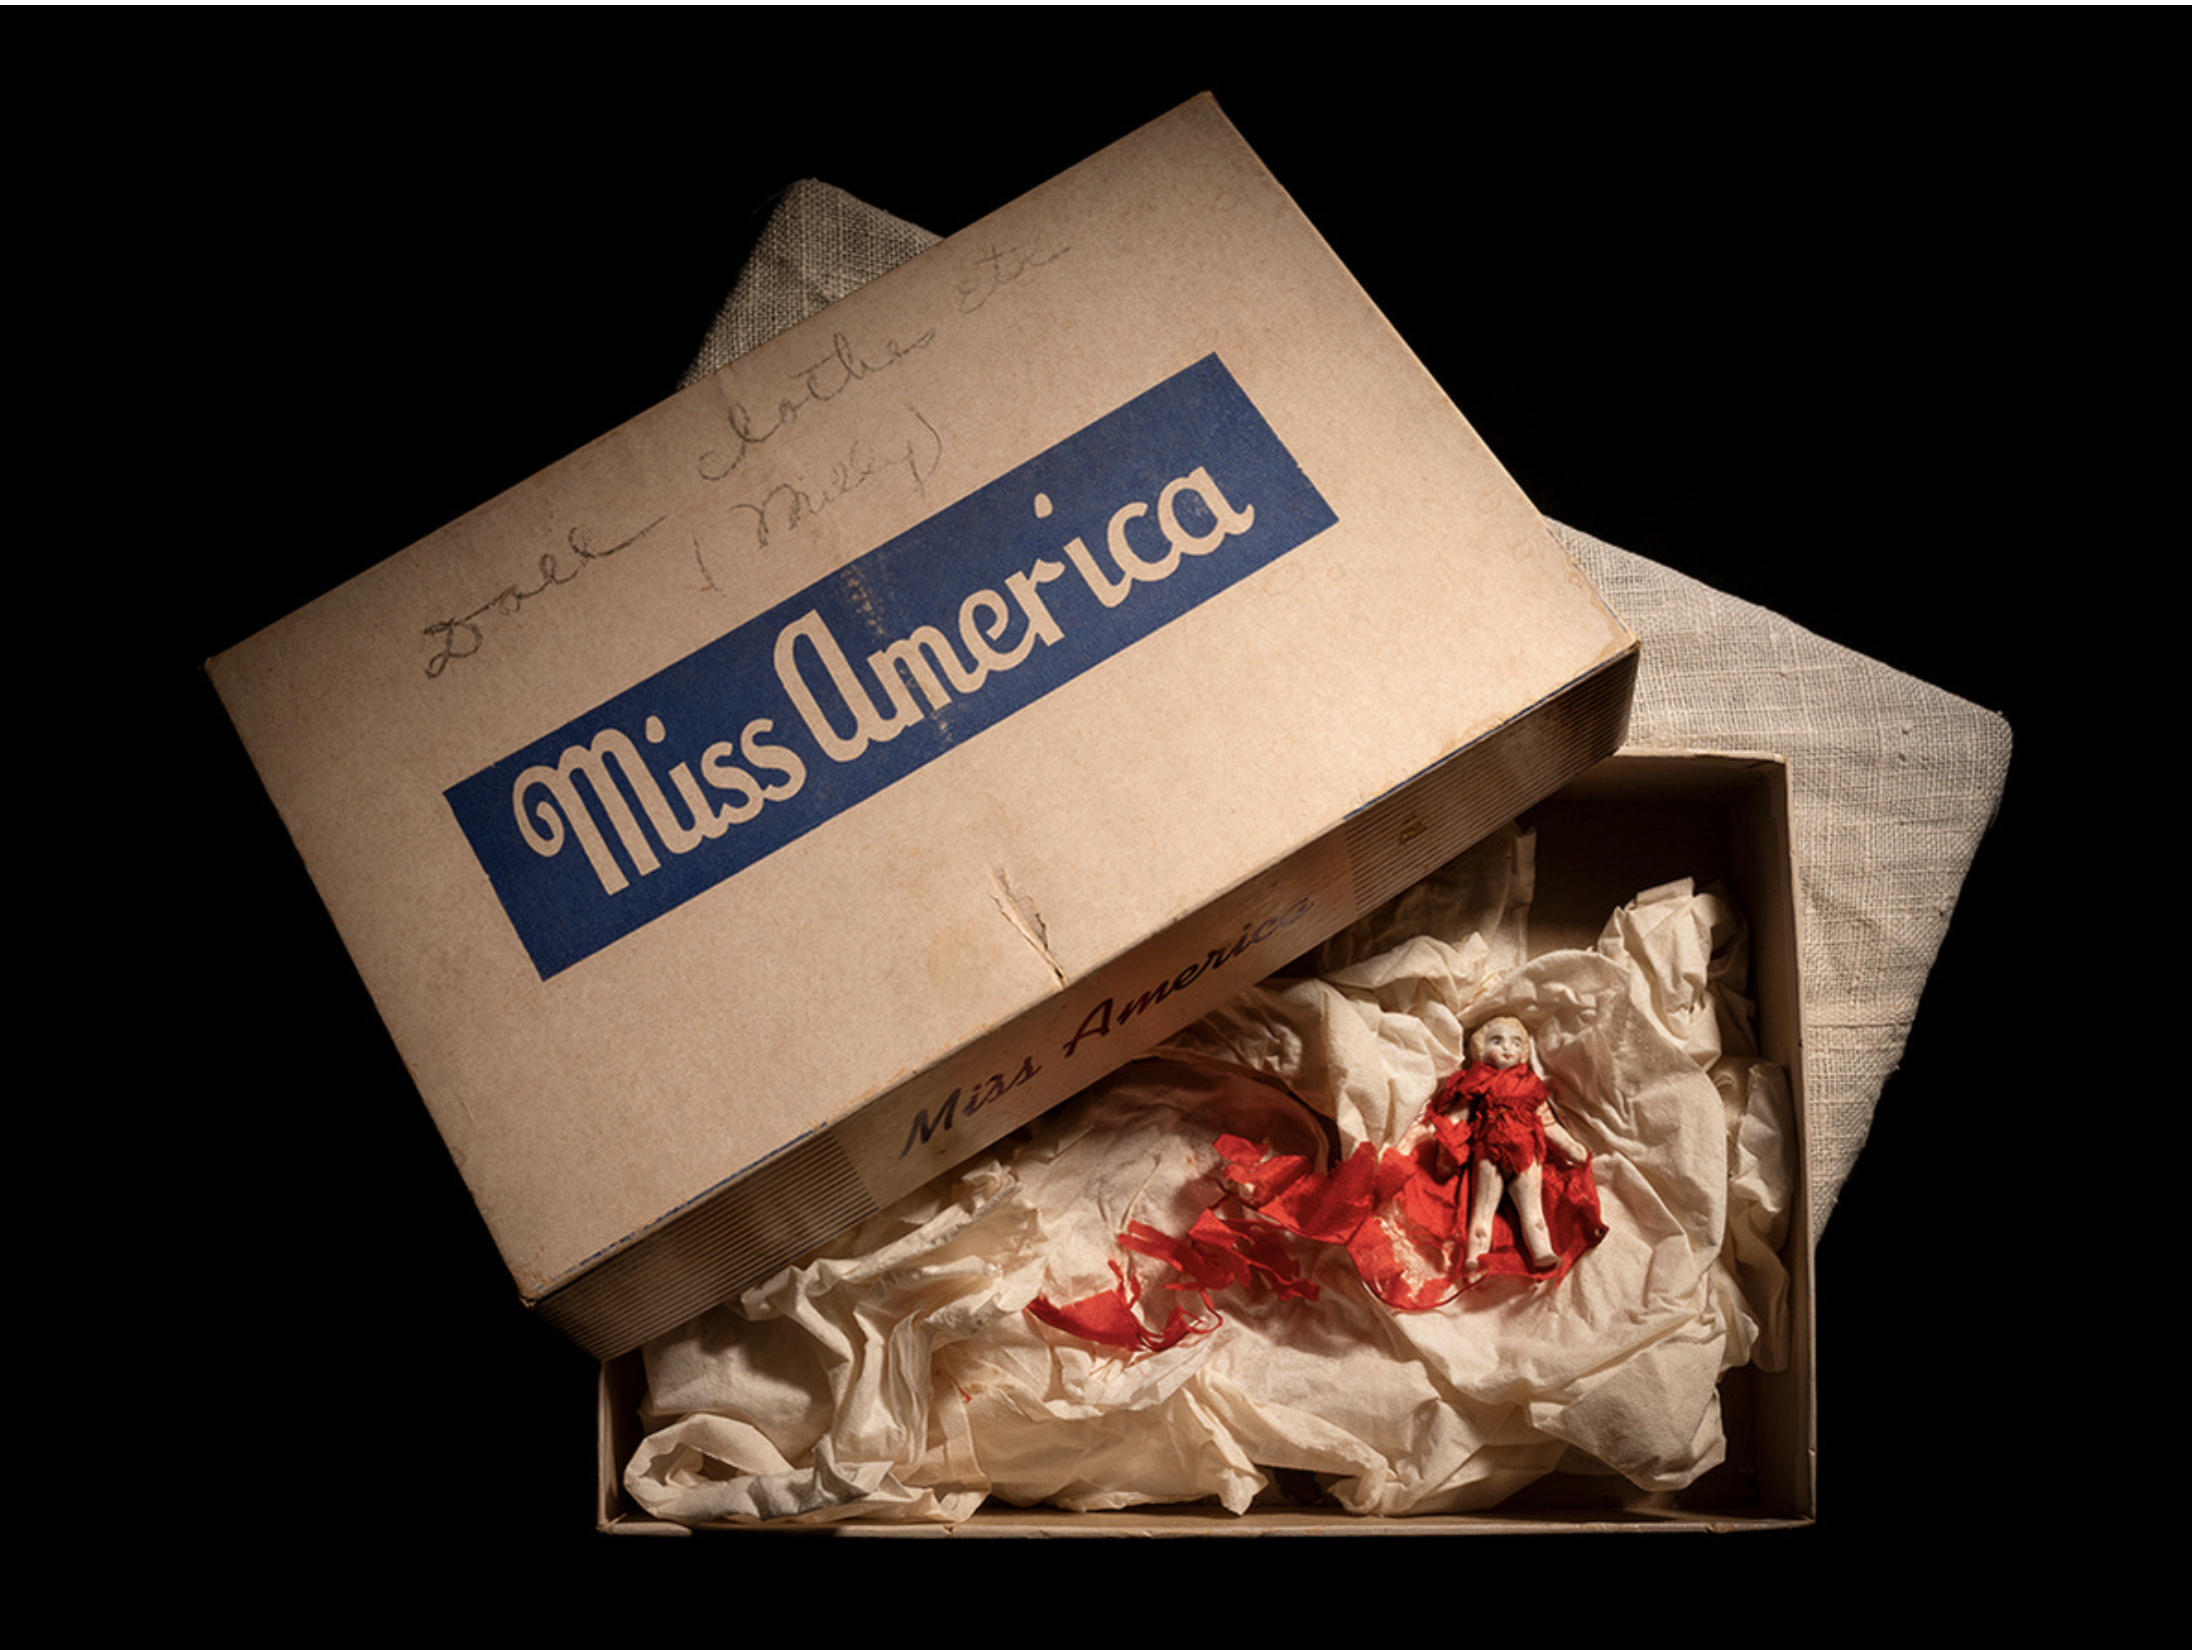 Opened box with a doll inside. Box lid says "Miss America"